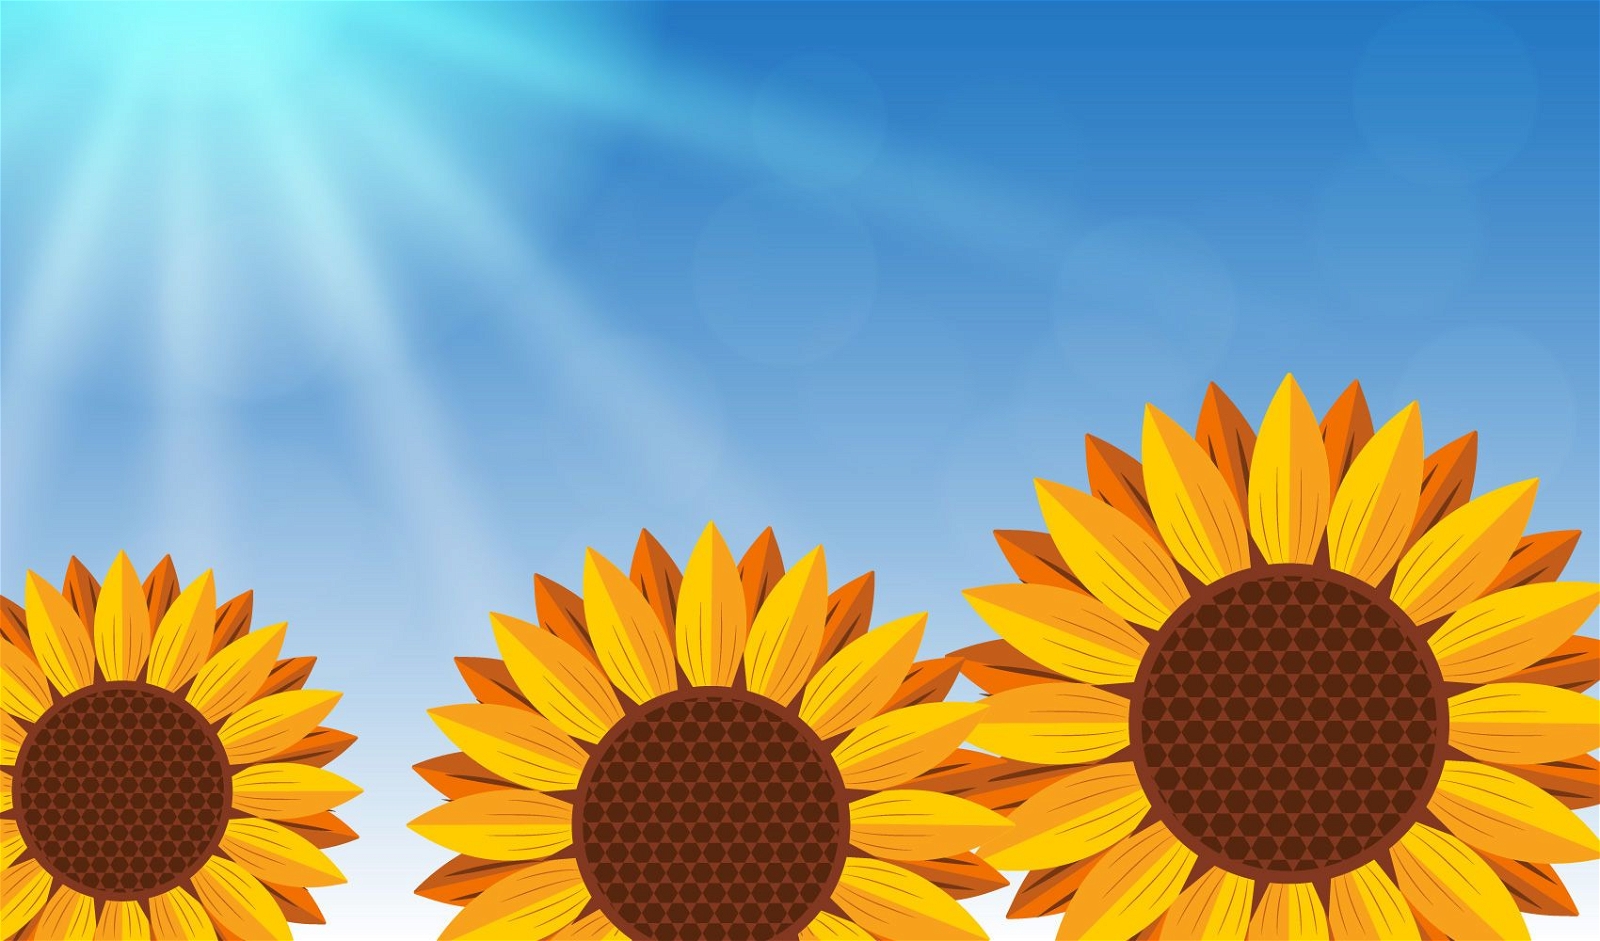 Realistic Sunflowers on Blue Background